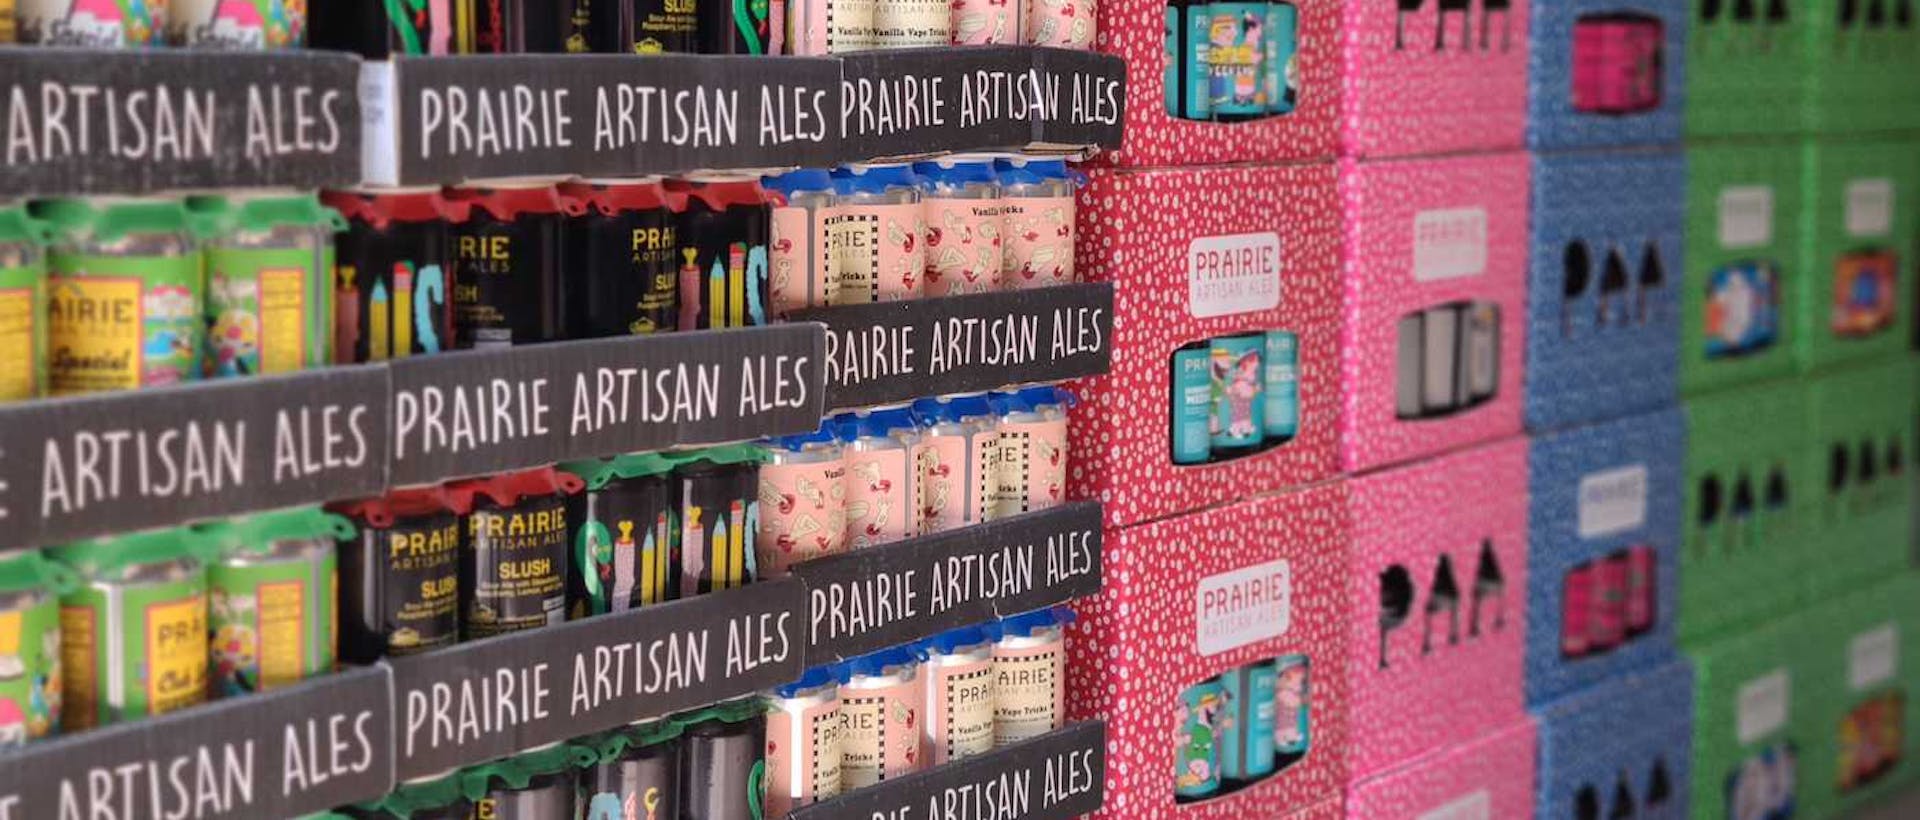 Stacks of colorful Prairie Artisan Ales beer cans in cases and boxes